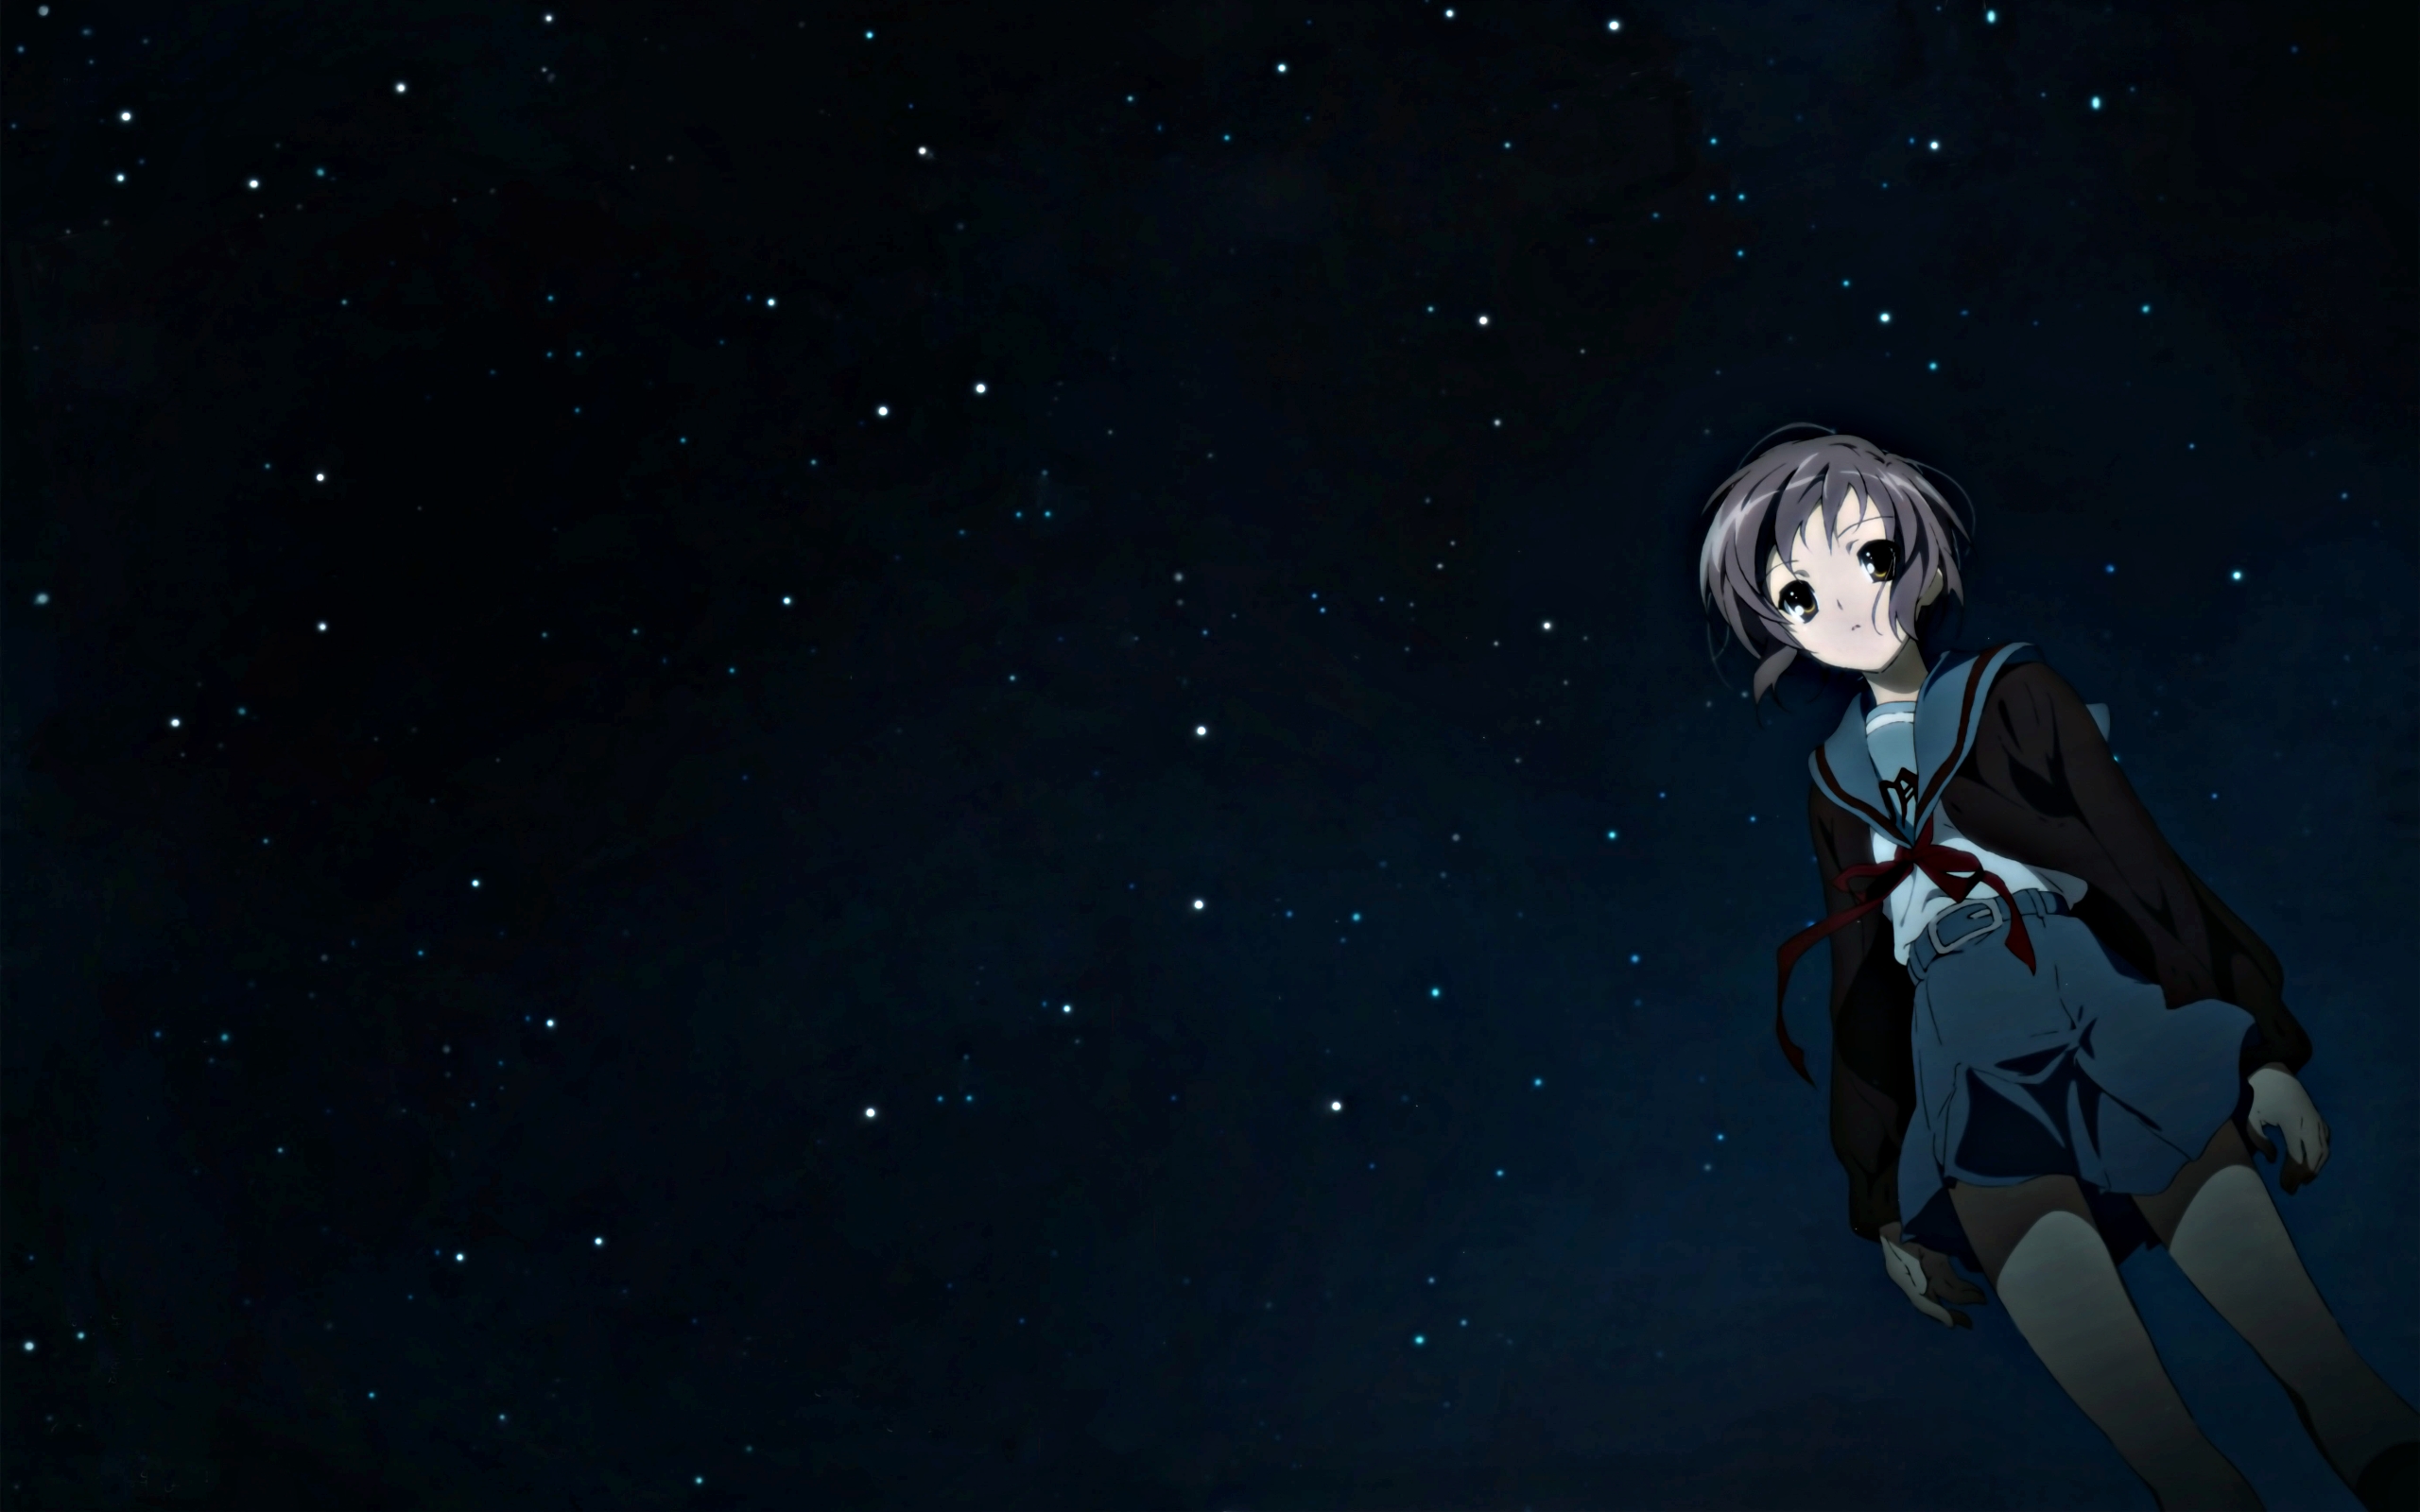 Anime Night Sky Wallpaper Hd Anime K Wallpapers Images And Background Wallpapers Den